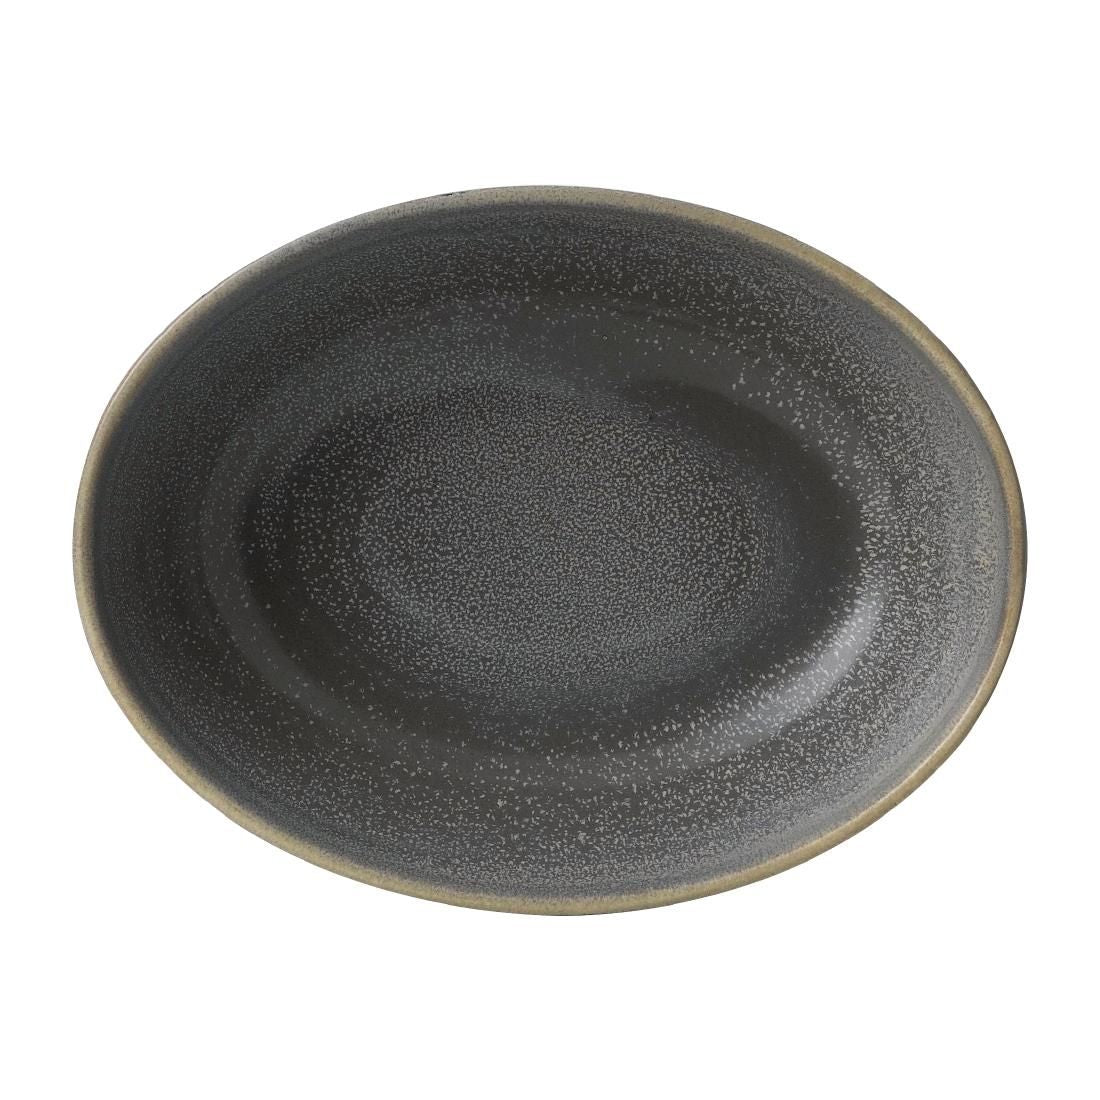 FE300 Dudson Evo Granite Deep Oval Bowl 216 x 162mm (Pack of 6) JD Catering Equipment Solutions Ltd